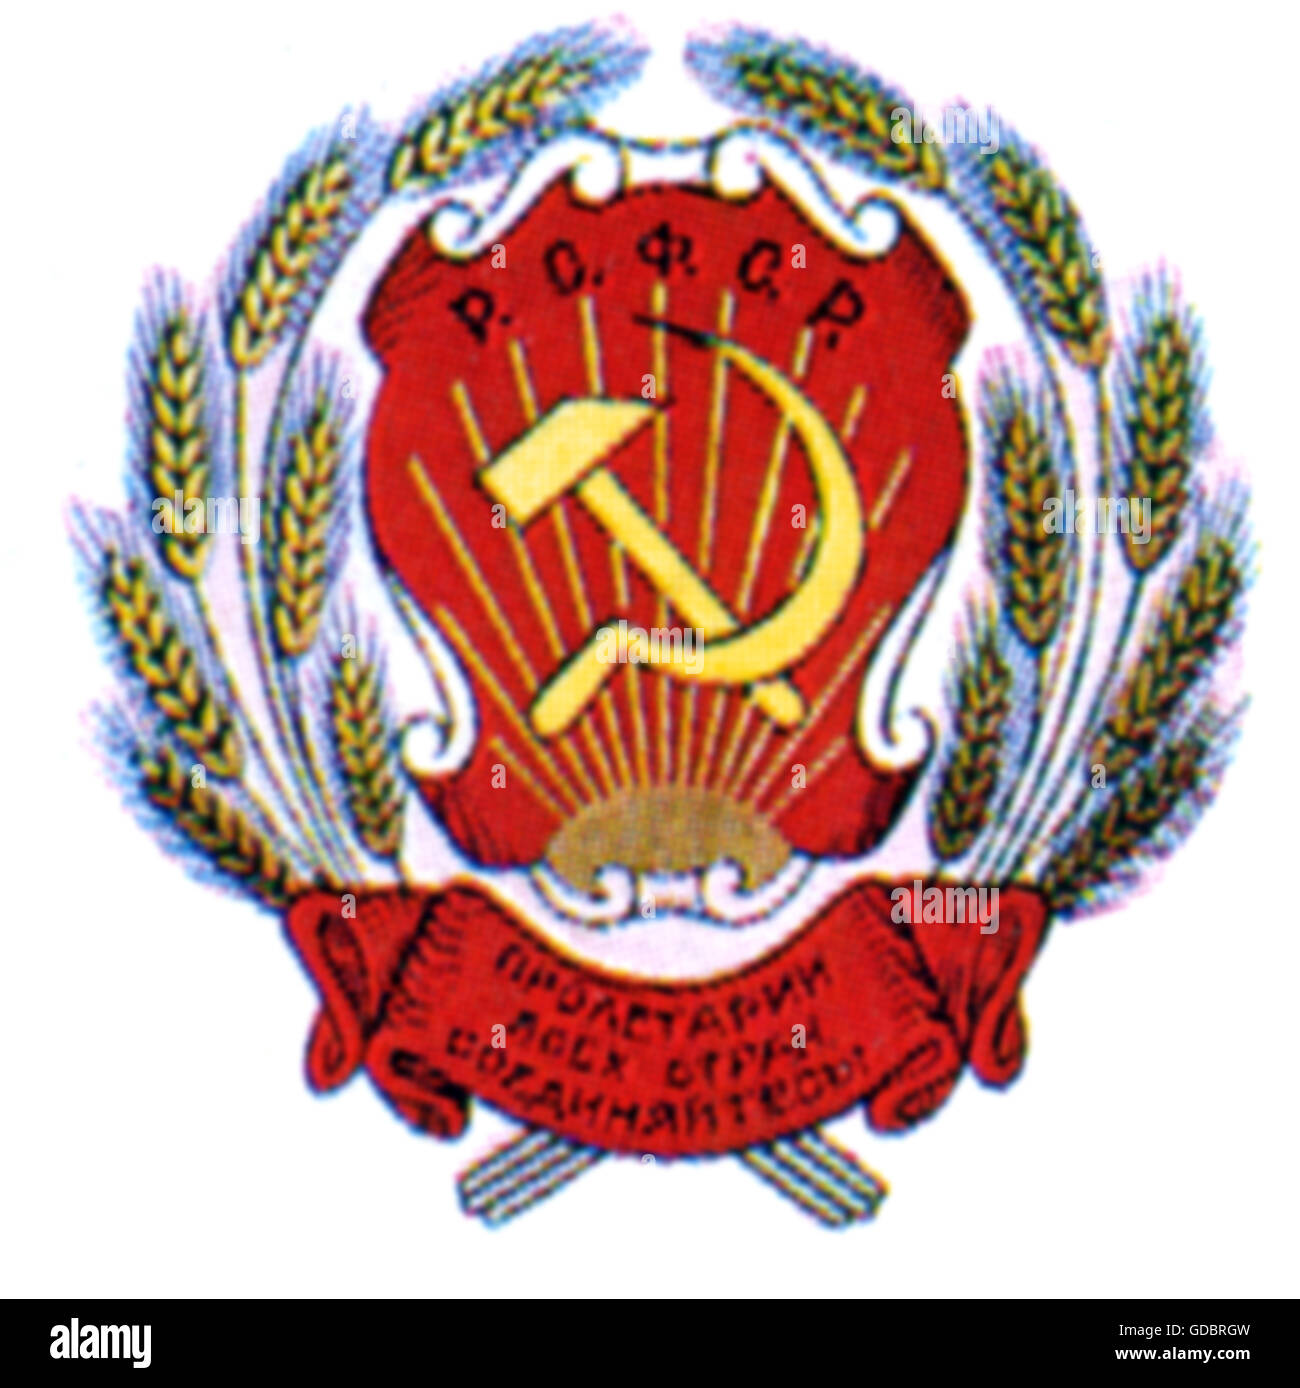 heraldry, coat of arms, Russia, state coat of arms of the Russian Soviet Federative Socialist Republic (RSFSR), 1922 - 1991, Additional-Rights-Clearences-Not Available Stock Photo